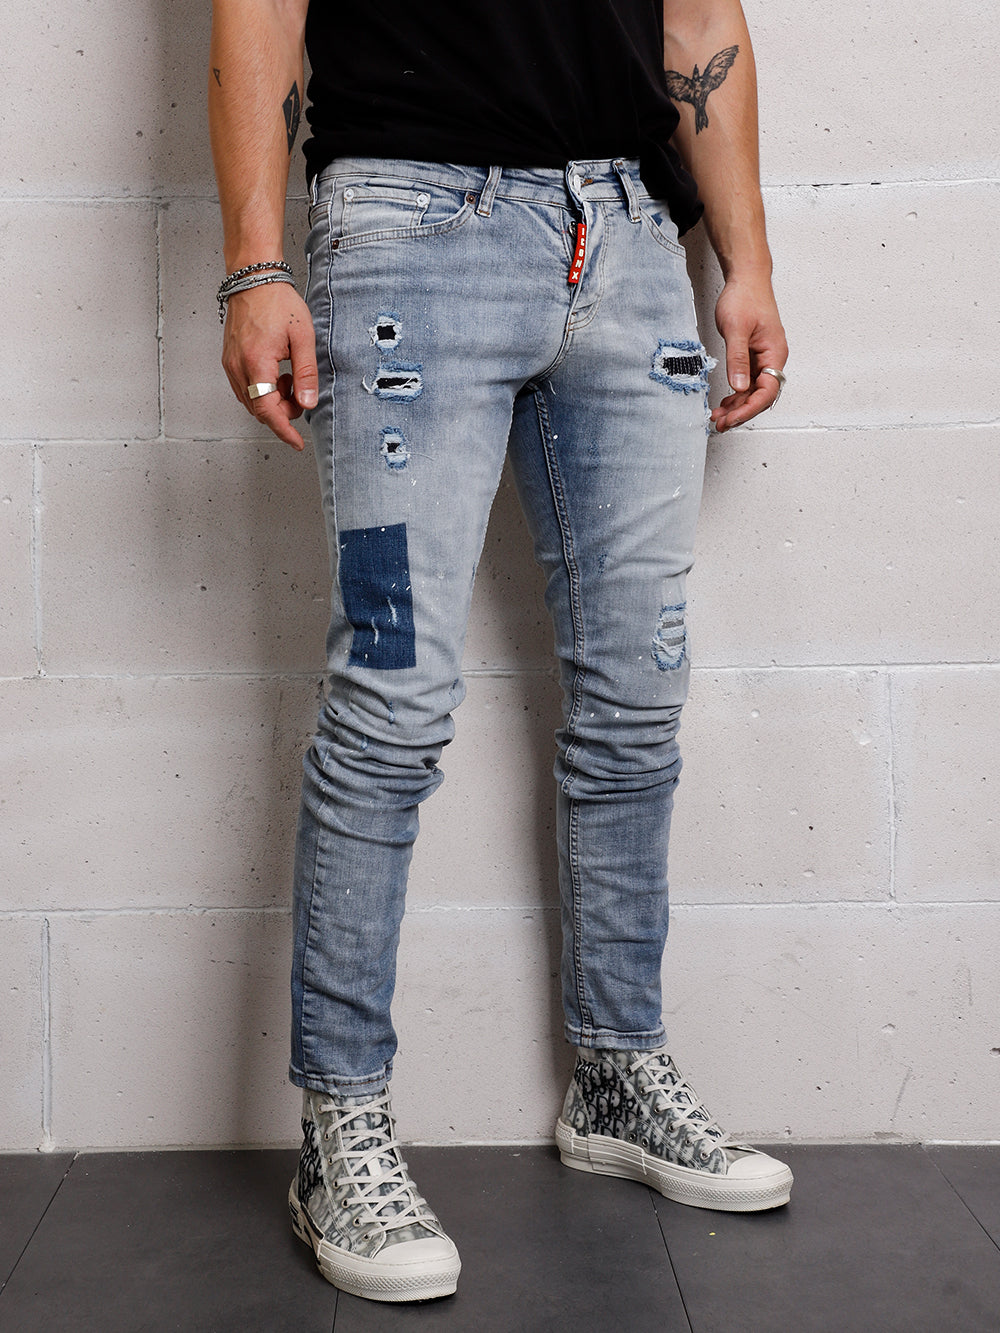 A man in a slim fit t-shirt and SKY BLUE ICON DENIM jeans standing against a distressed wall.